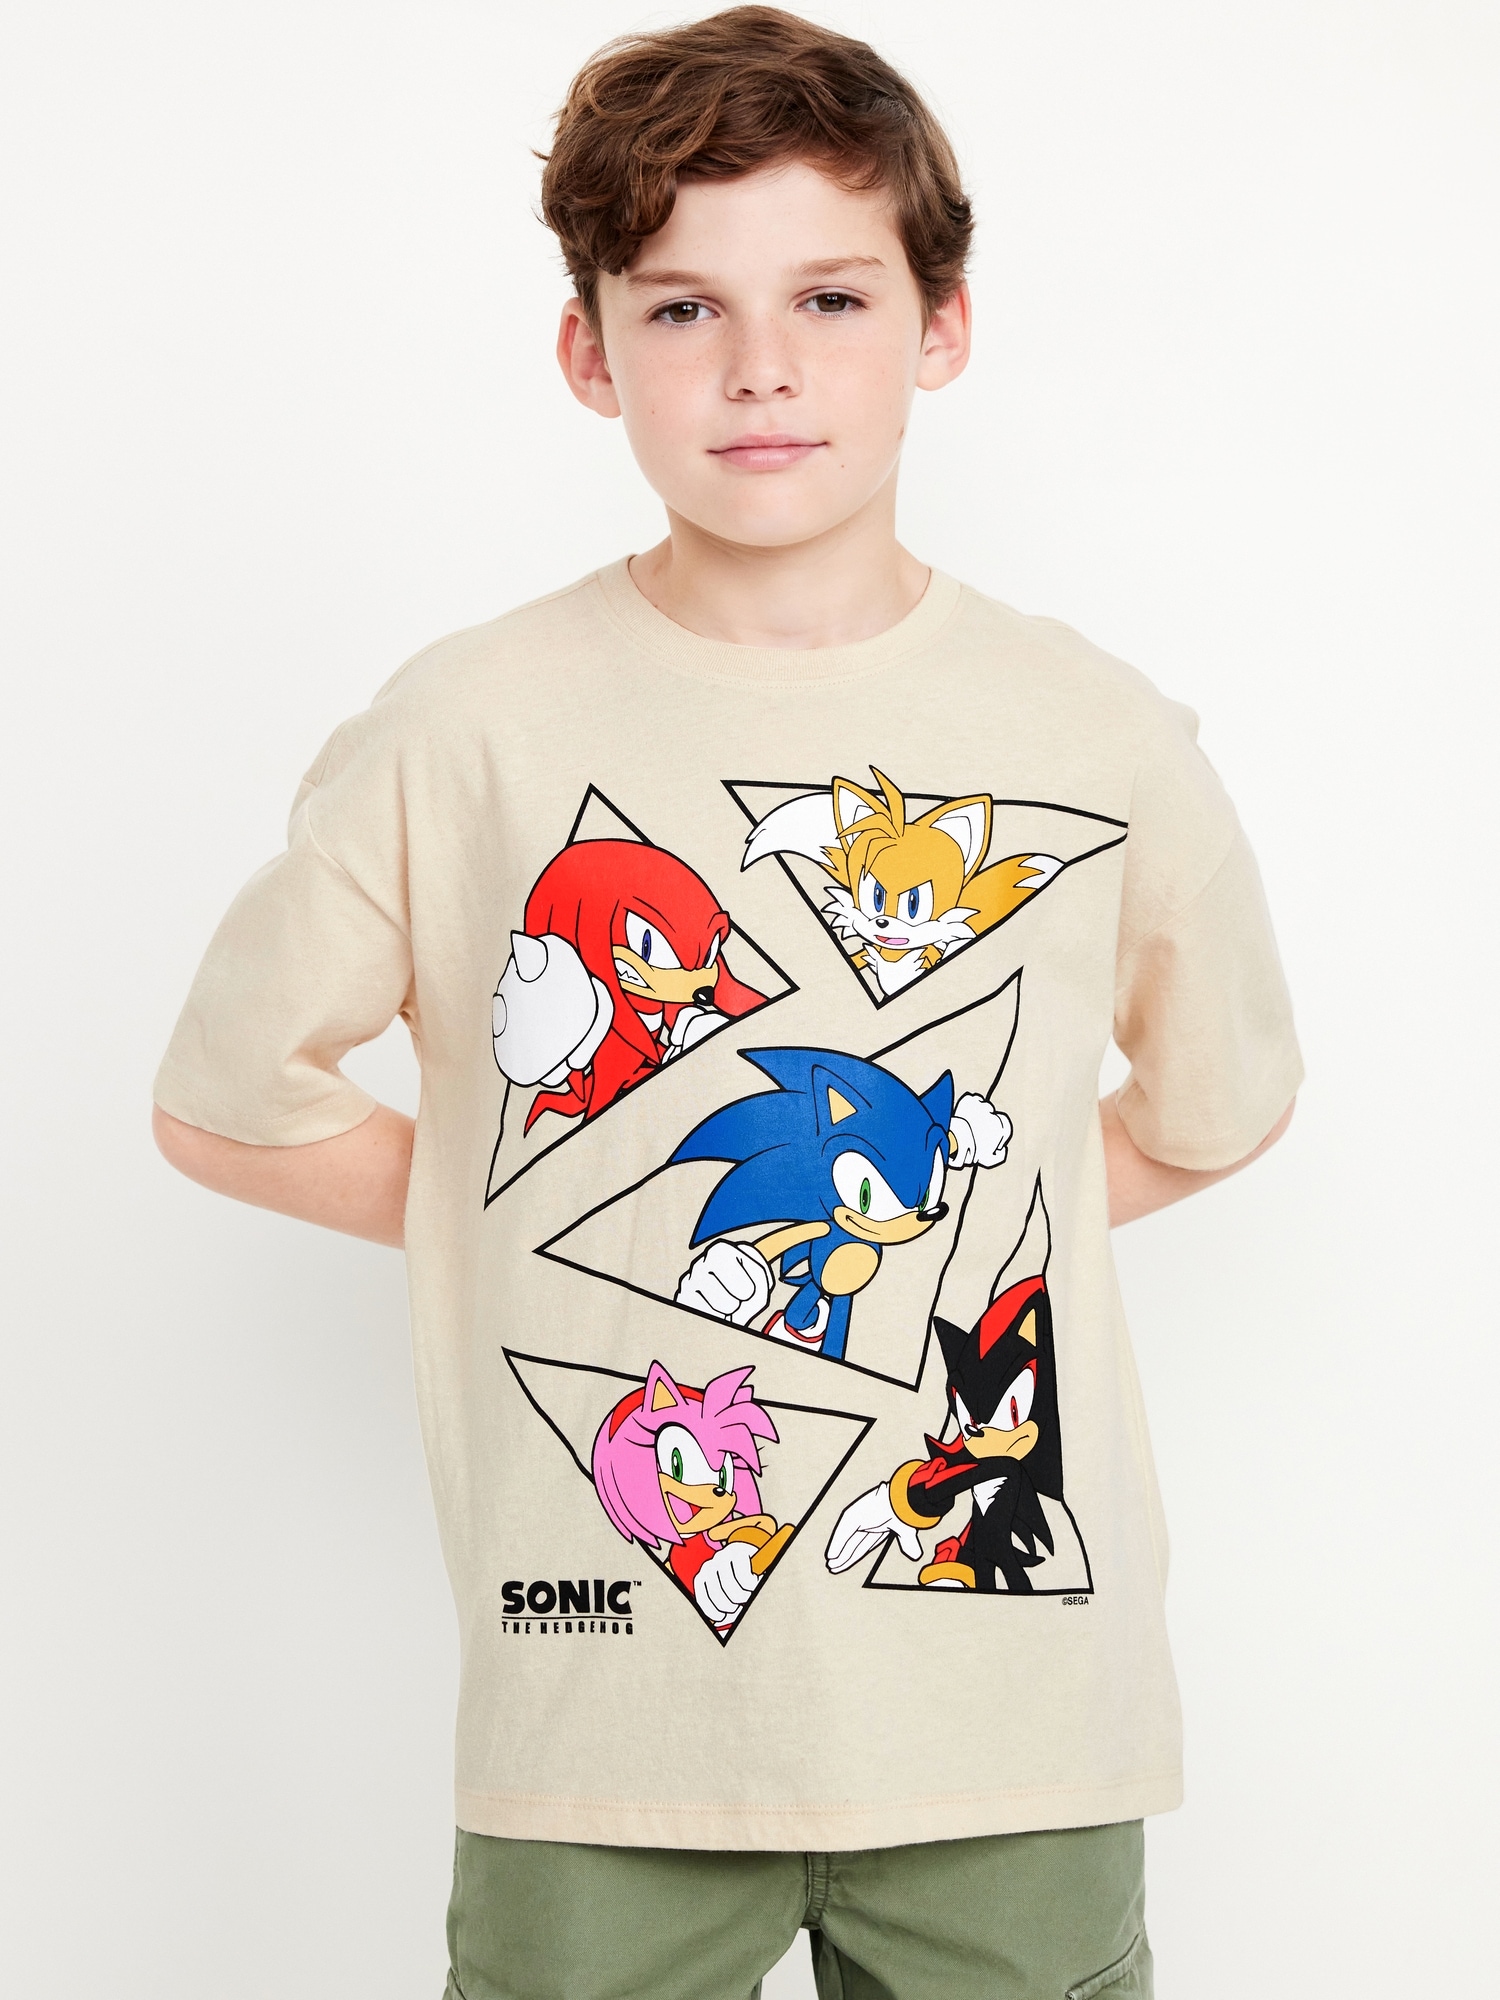 Sonic The Hedgehog™ Oversized Gender-Neutral Graphic T-Shirt for Kids